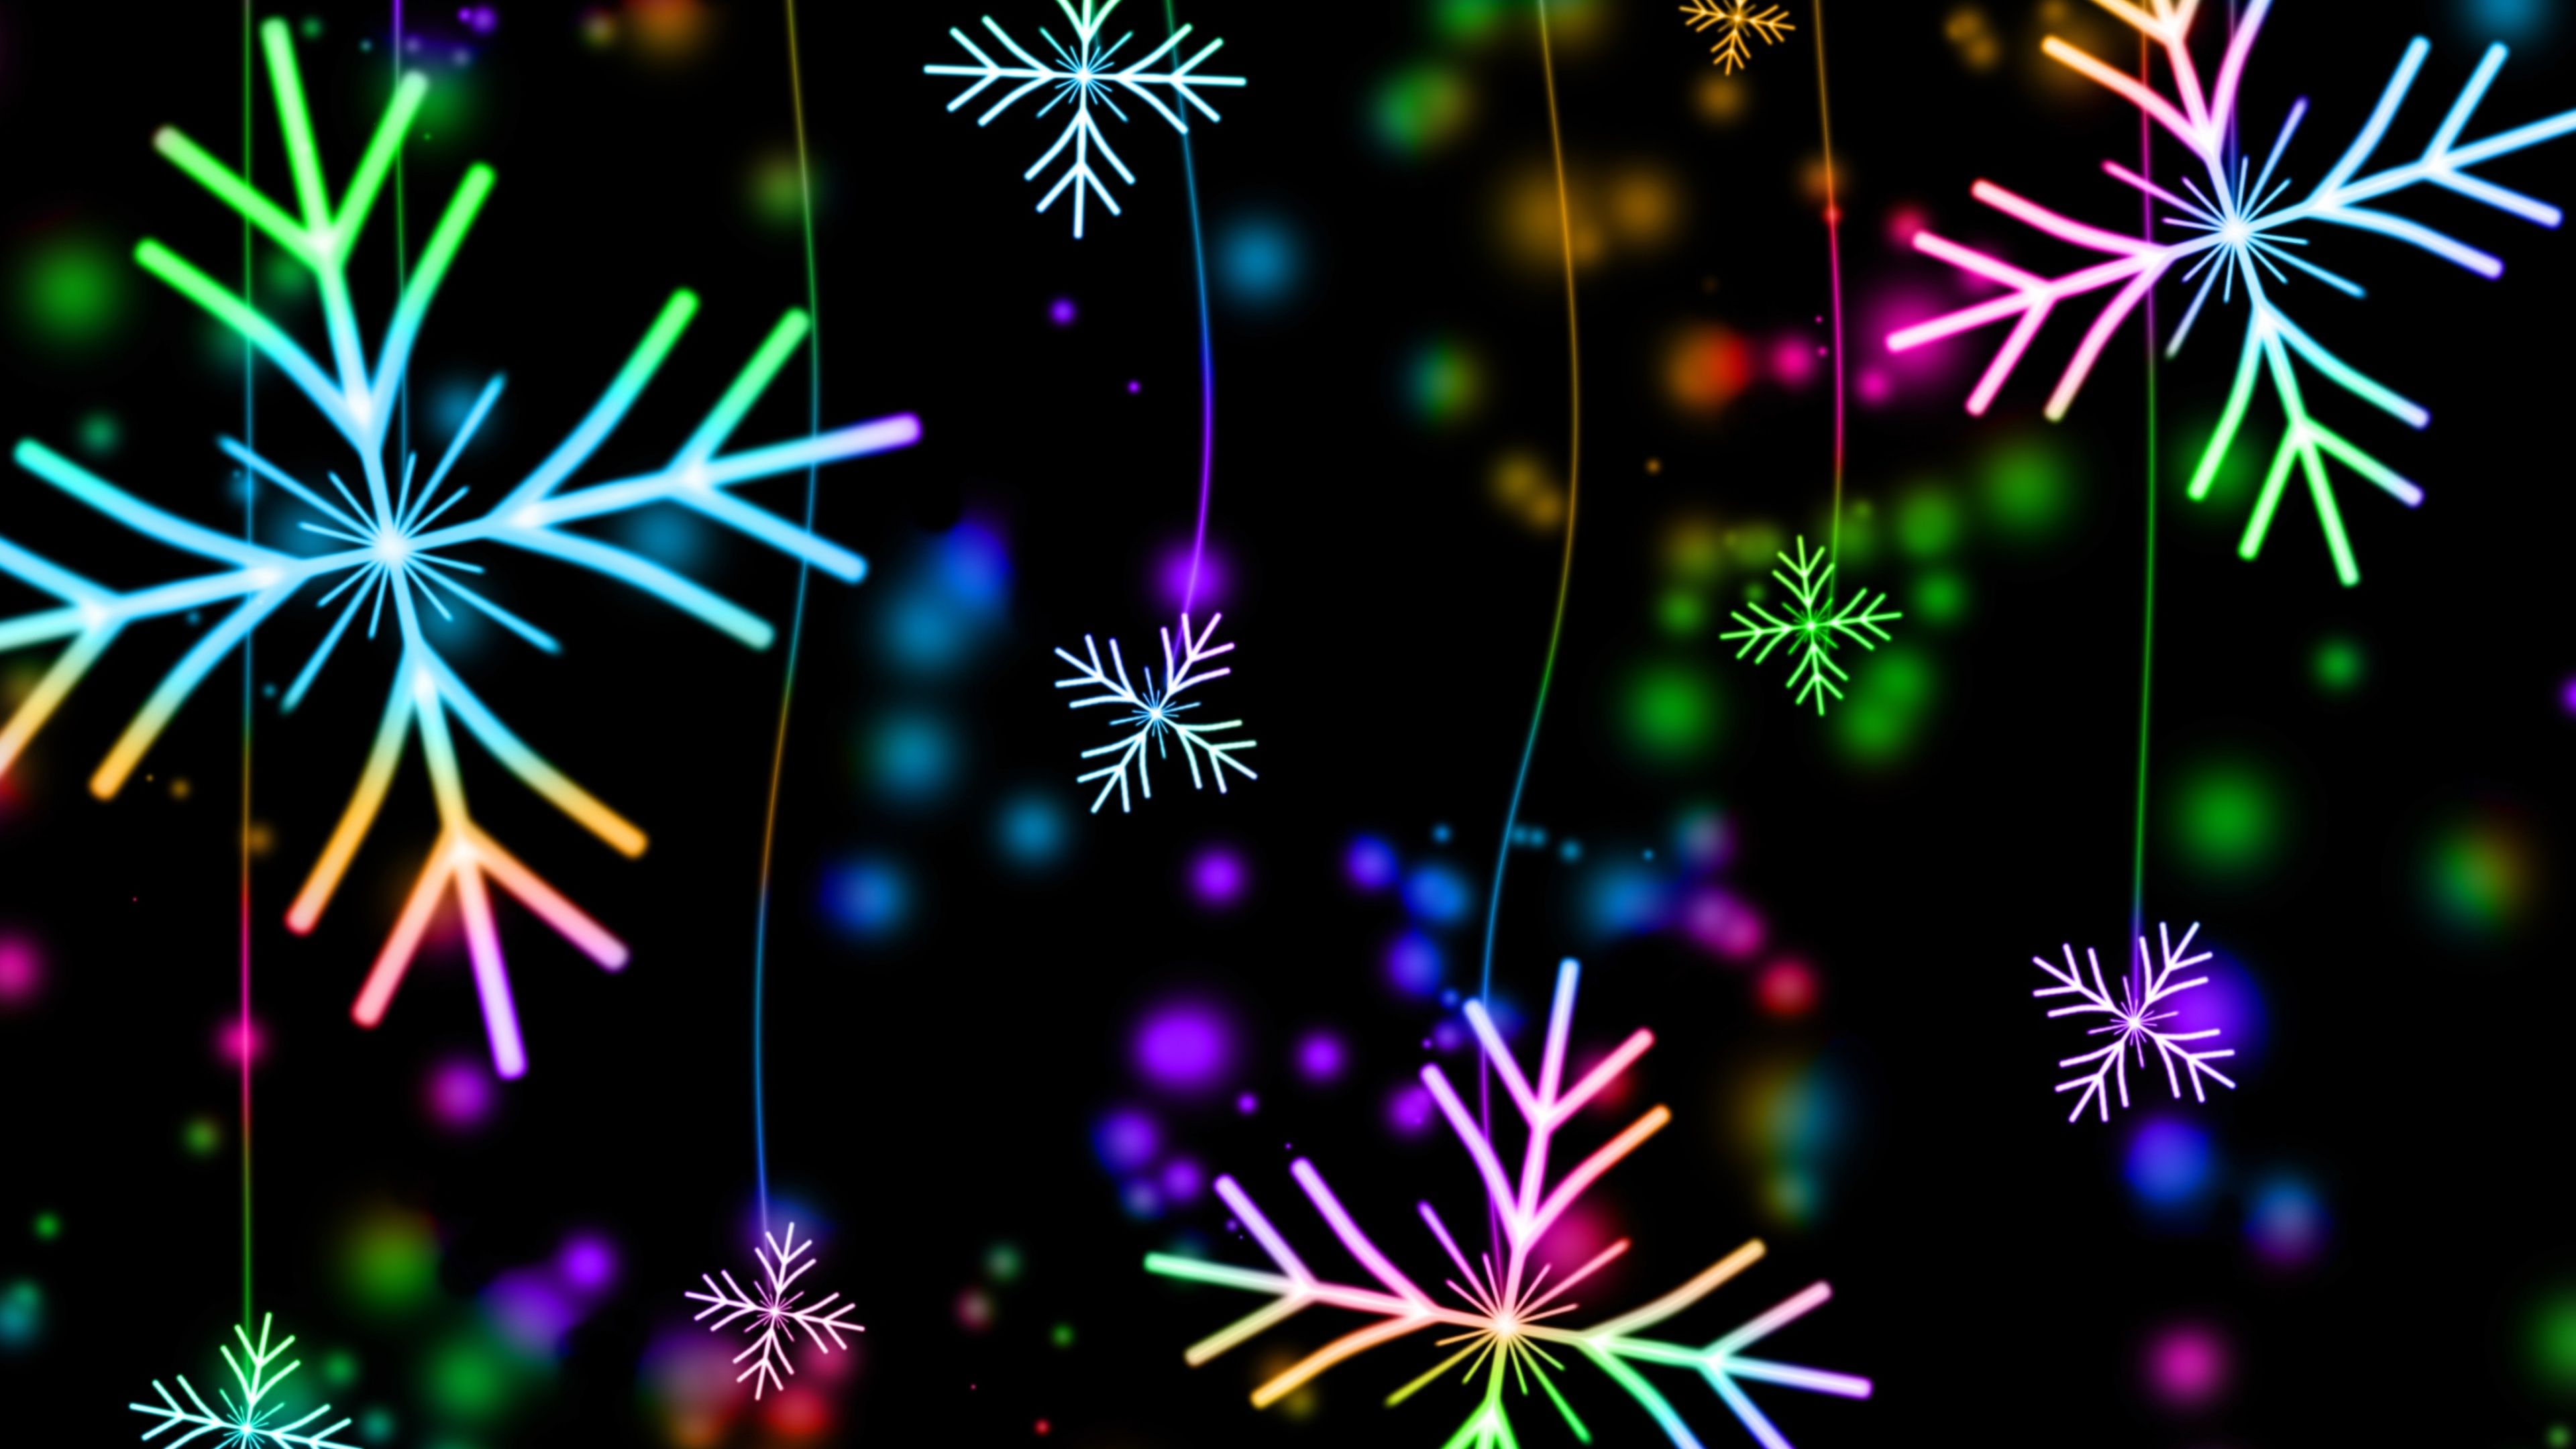 A colorful christmas snowflakes on black background - Snowflake